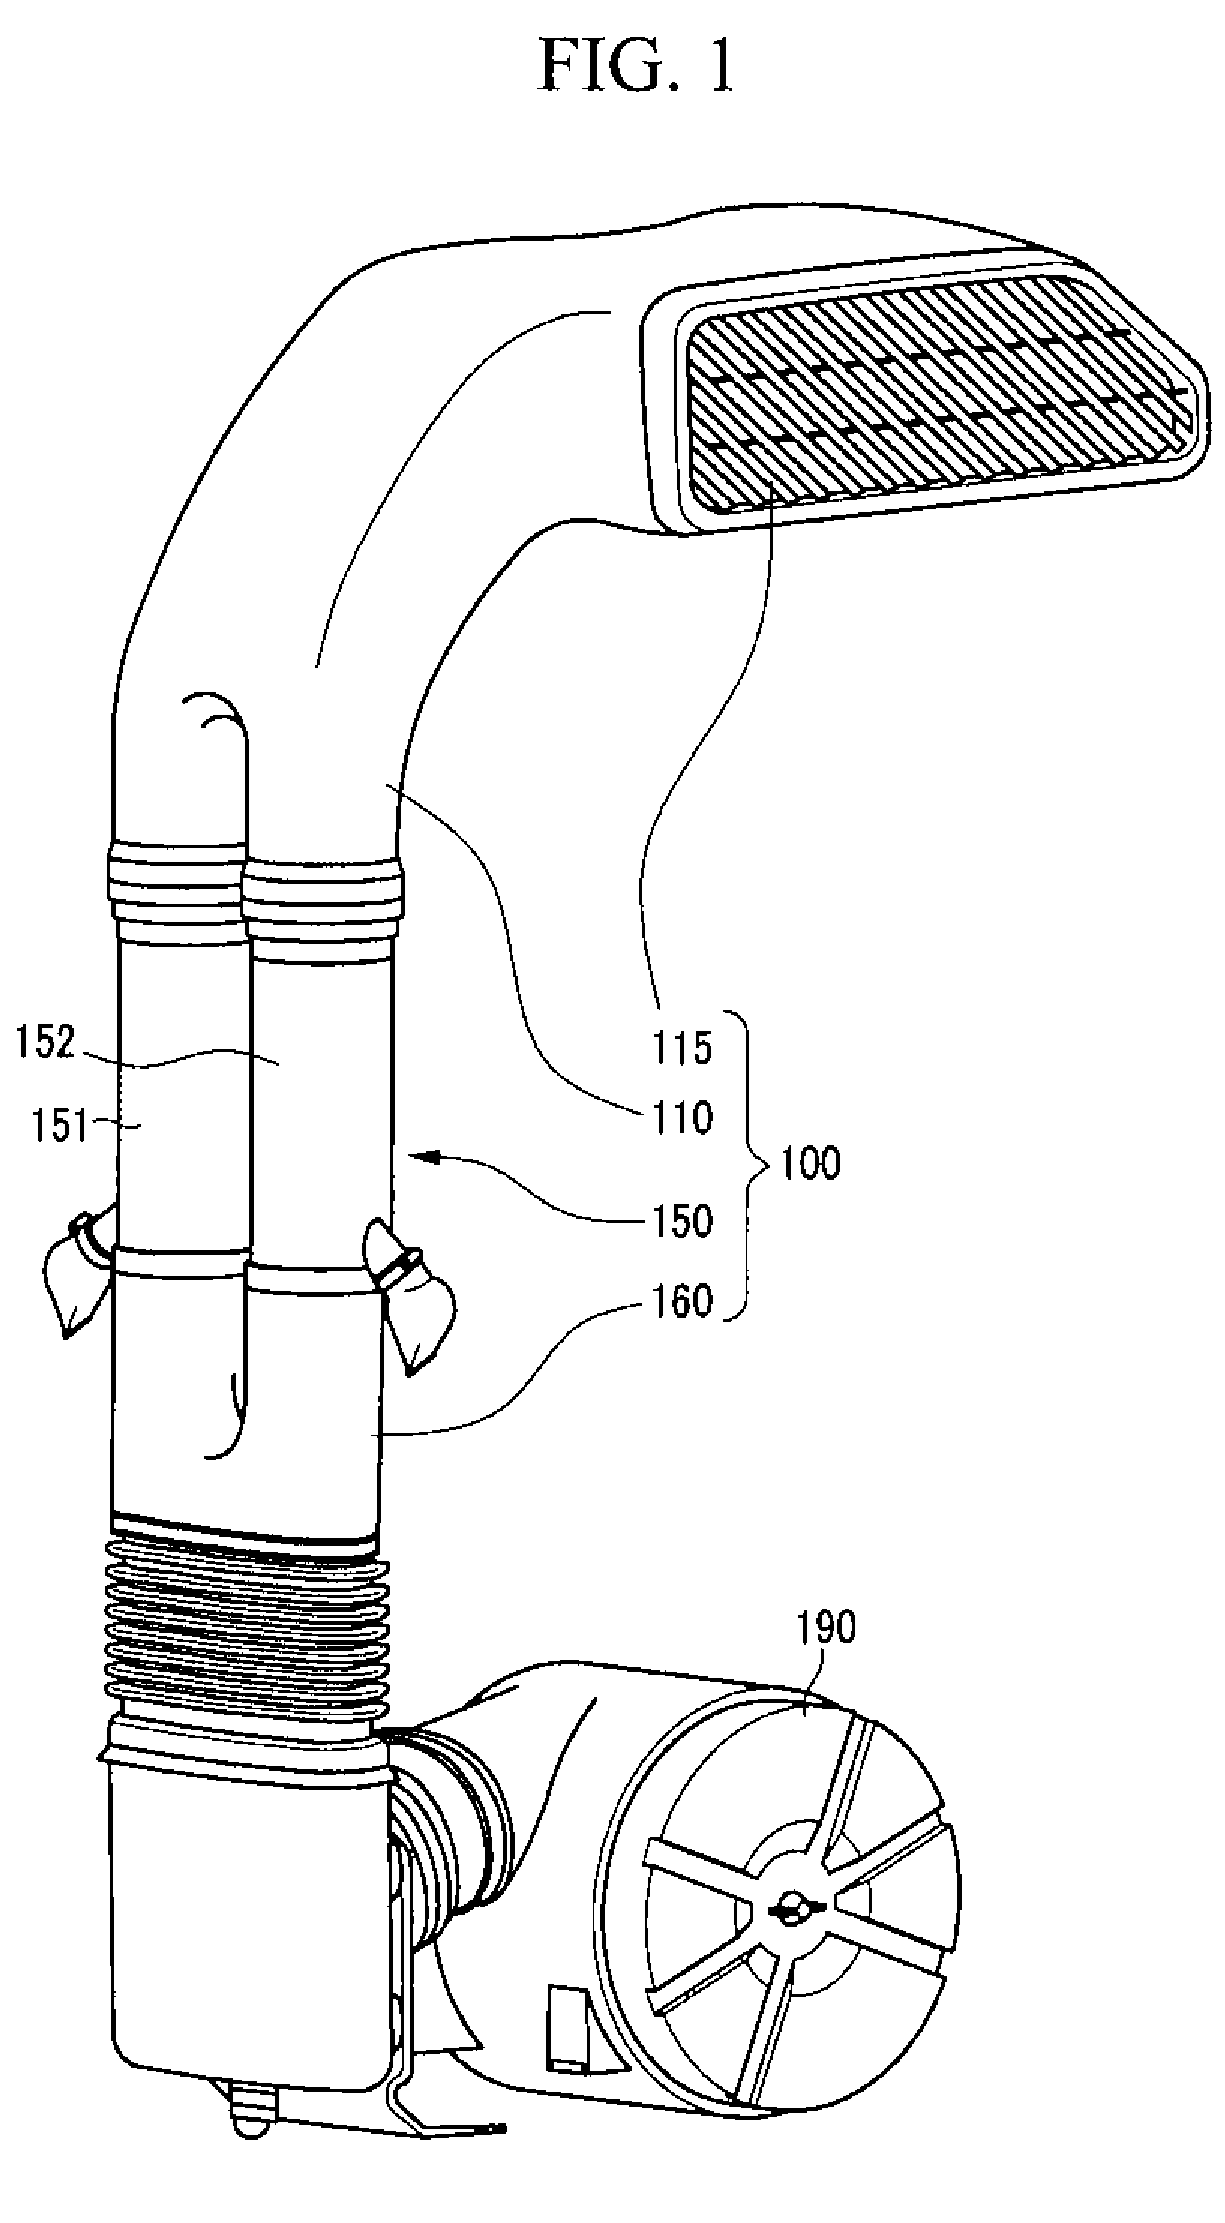 Intake duct system for an engine